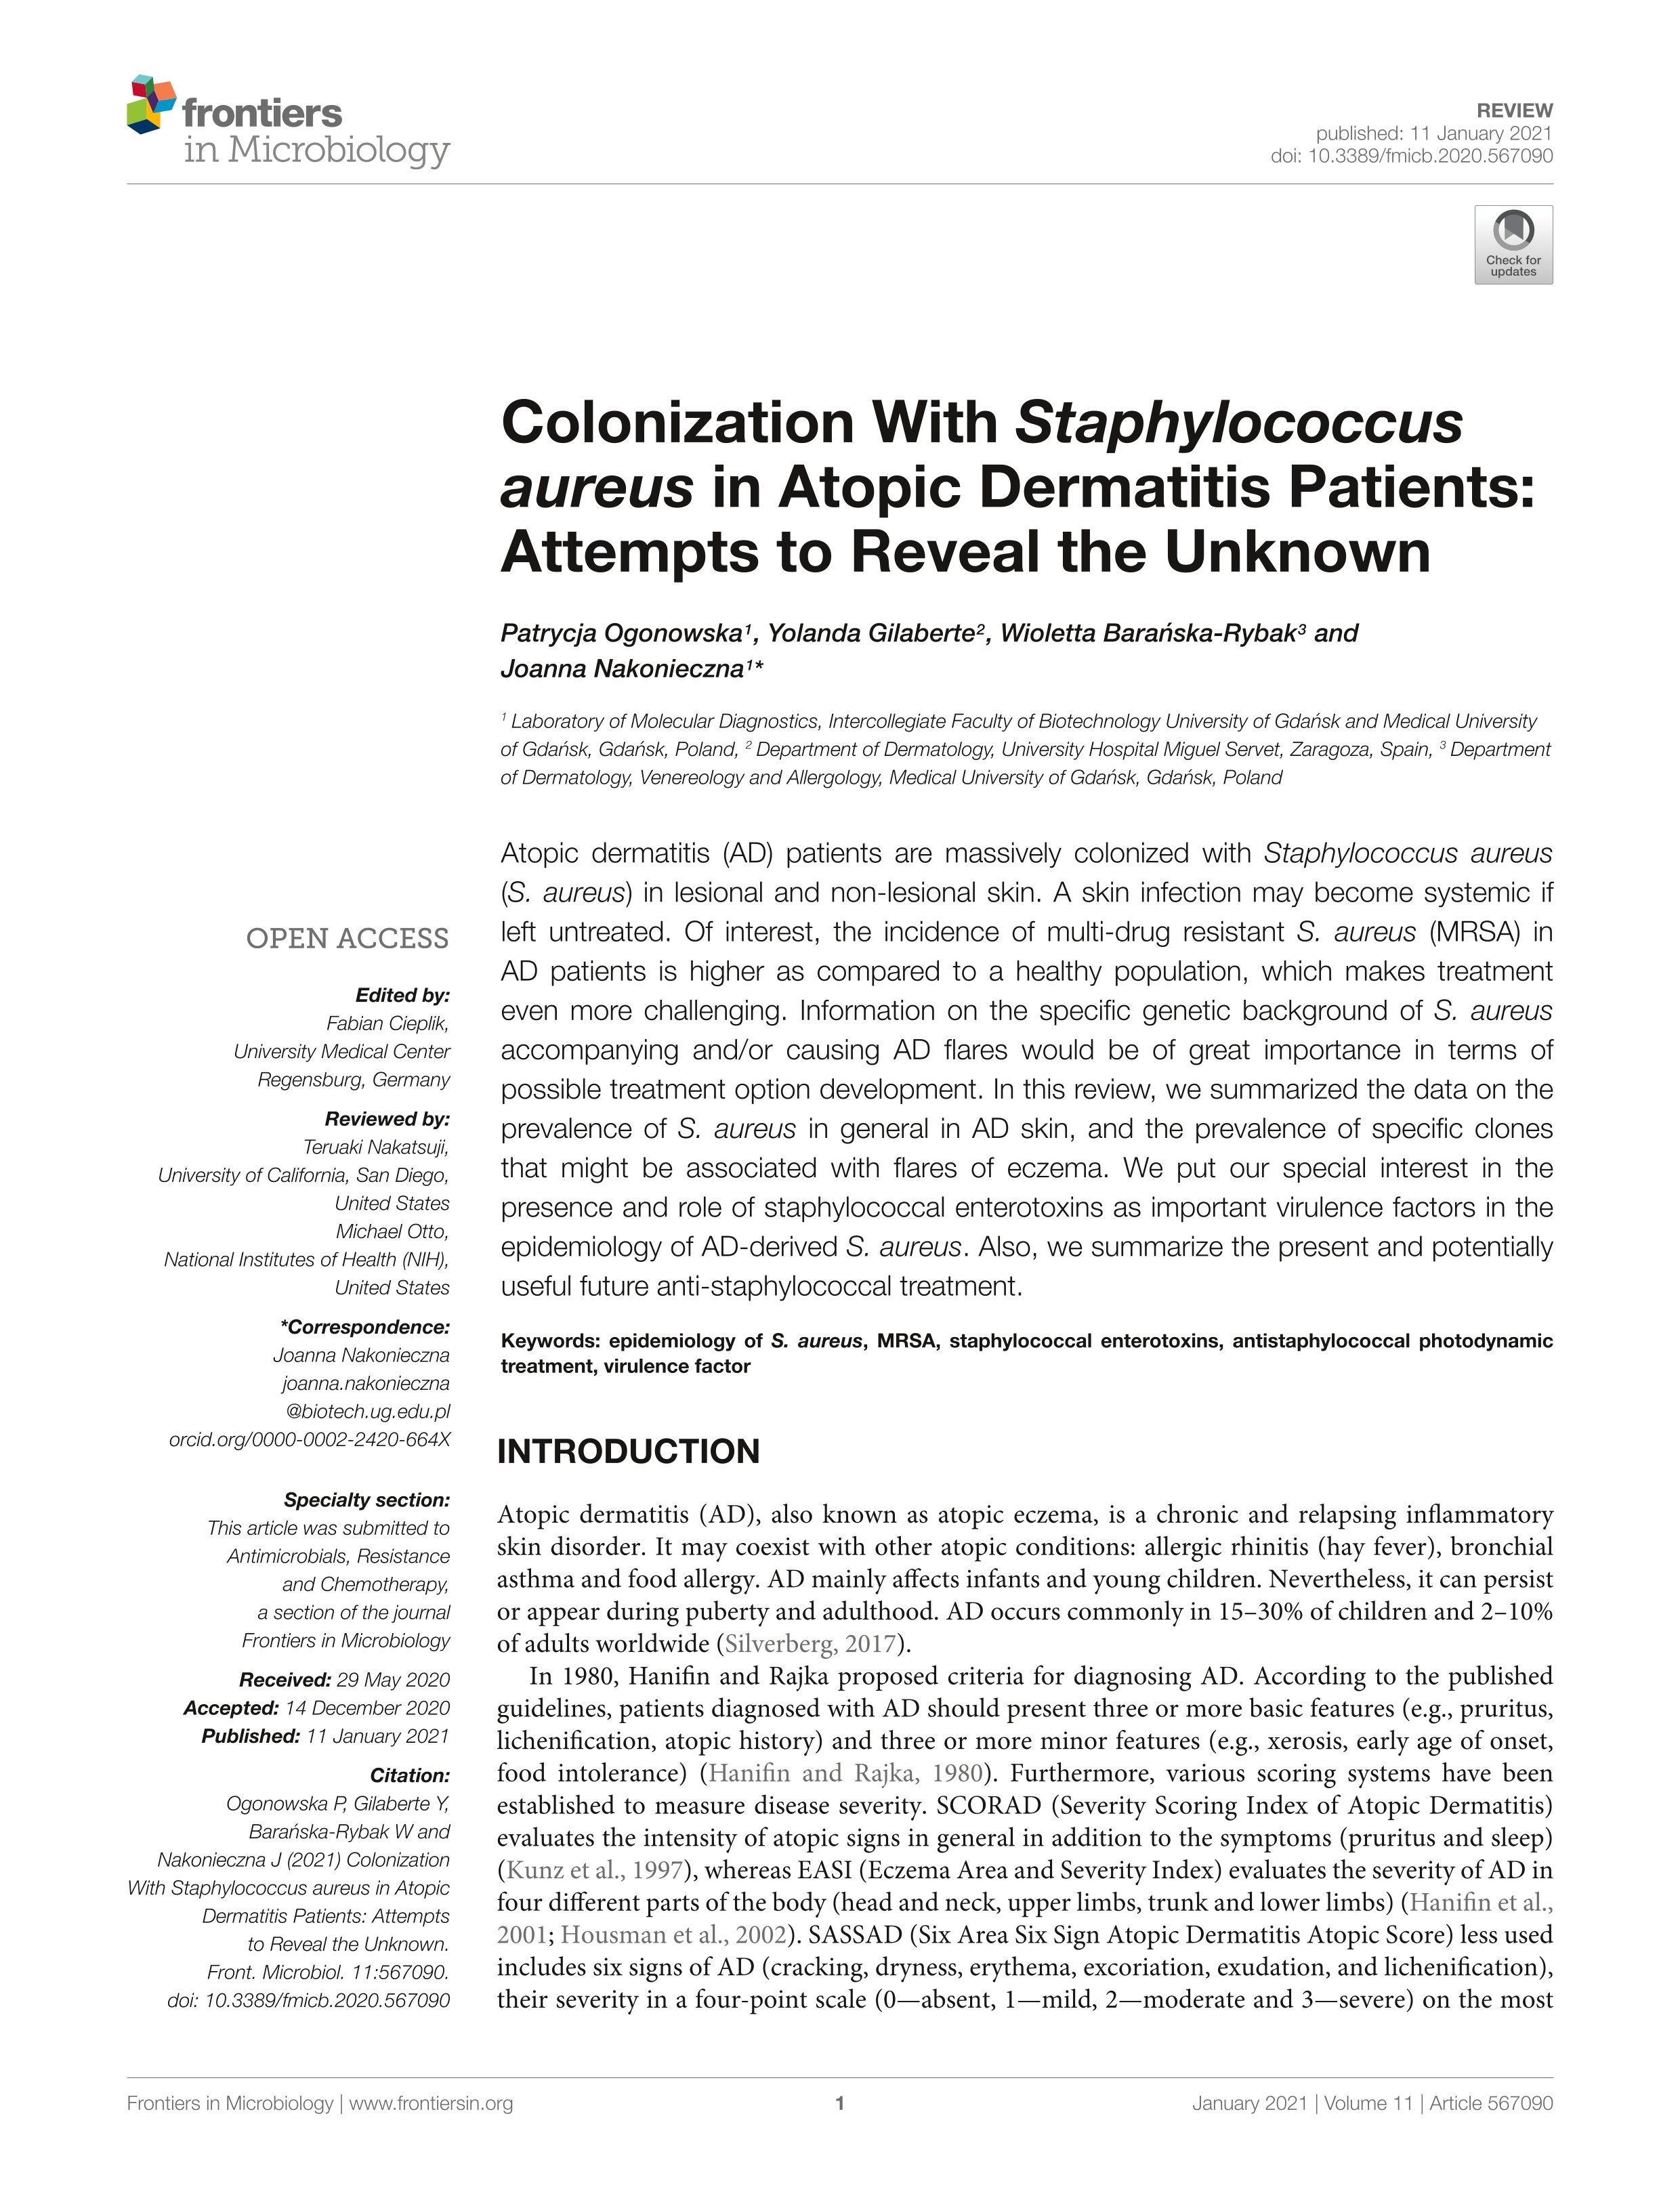 Colonization With Staphylococcus aureus in Atopic Dermatitis Patients: Attempts to Reveal the Unknown